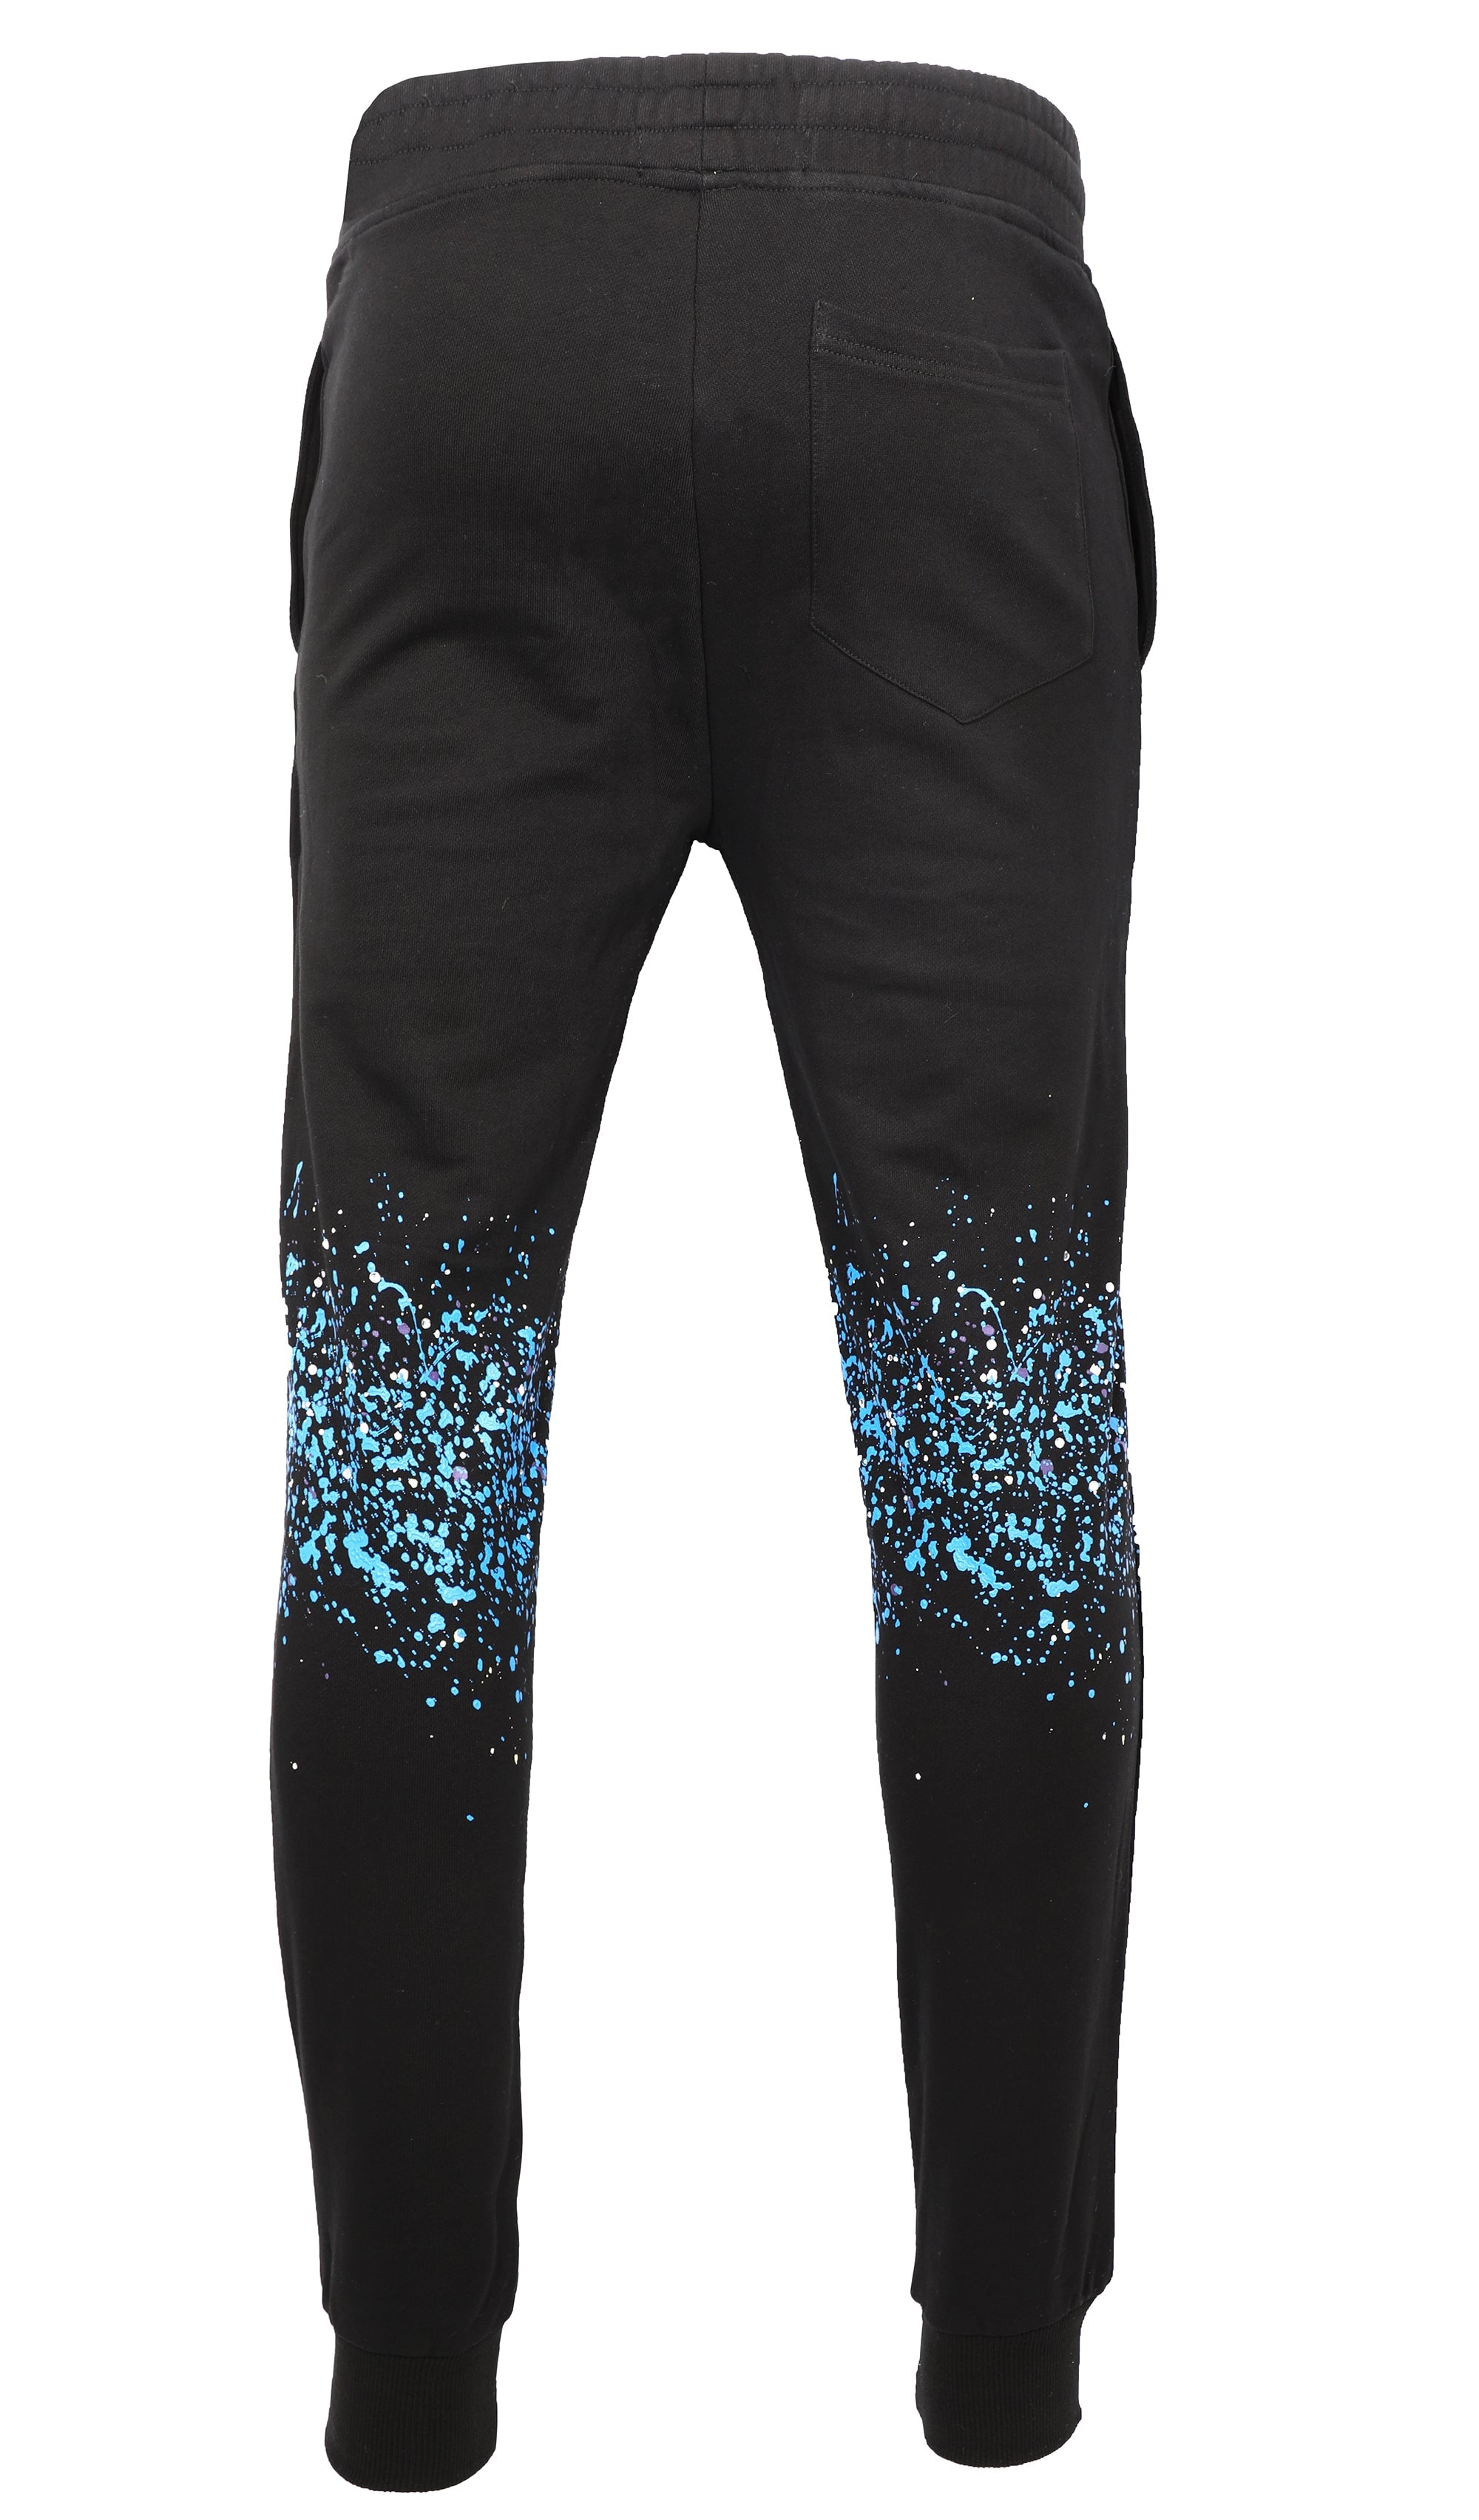 PAINT AND CRYSTALS SPLATTERED SWEATPANTS - BLACK